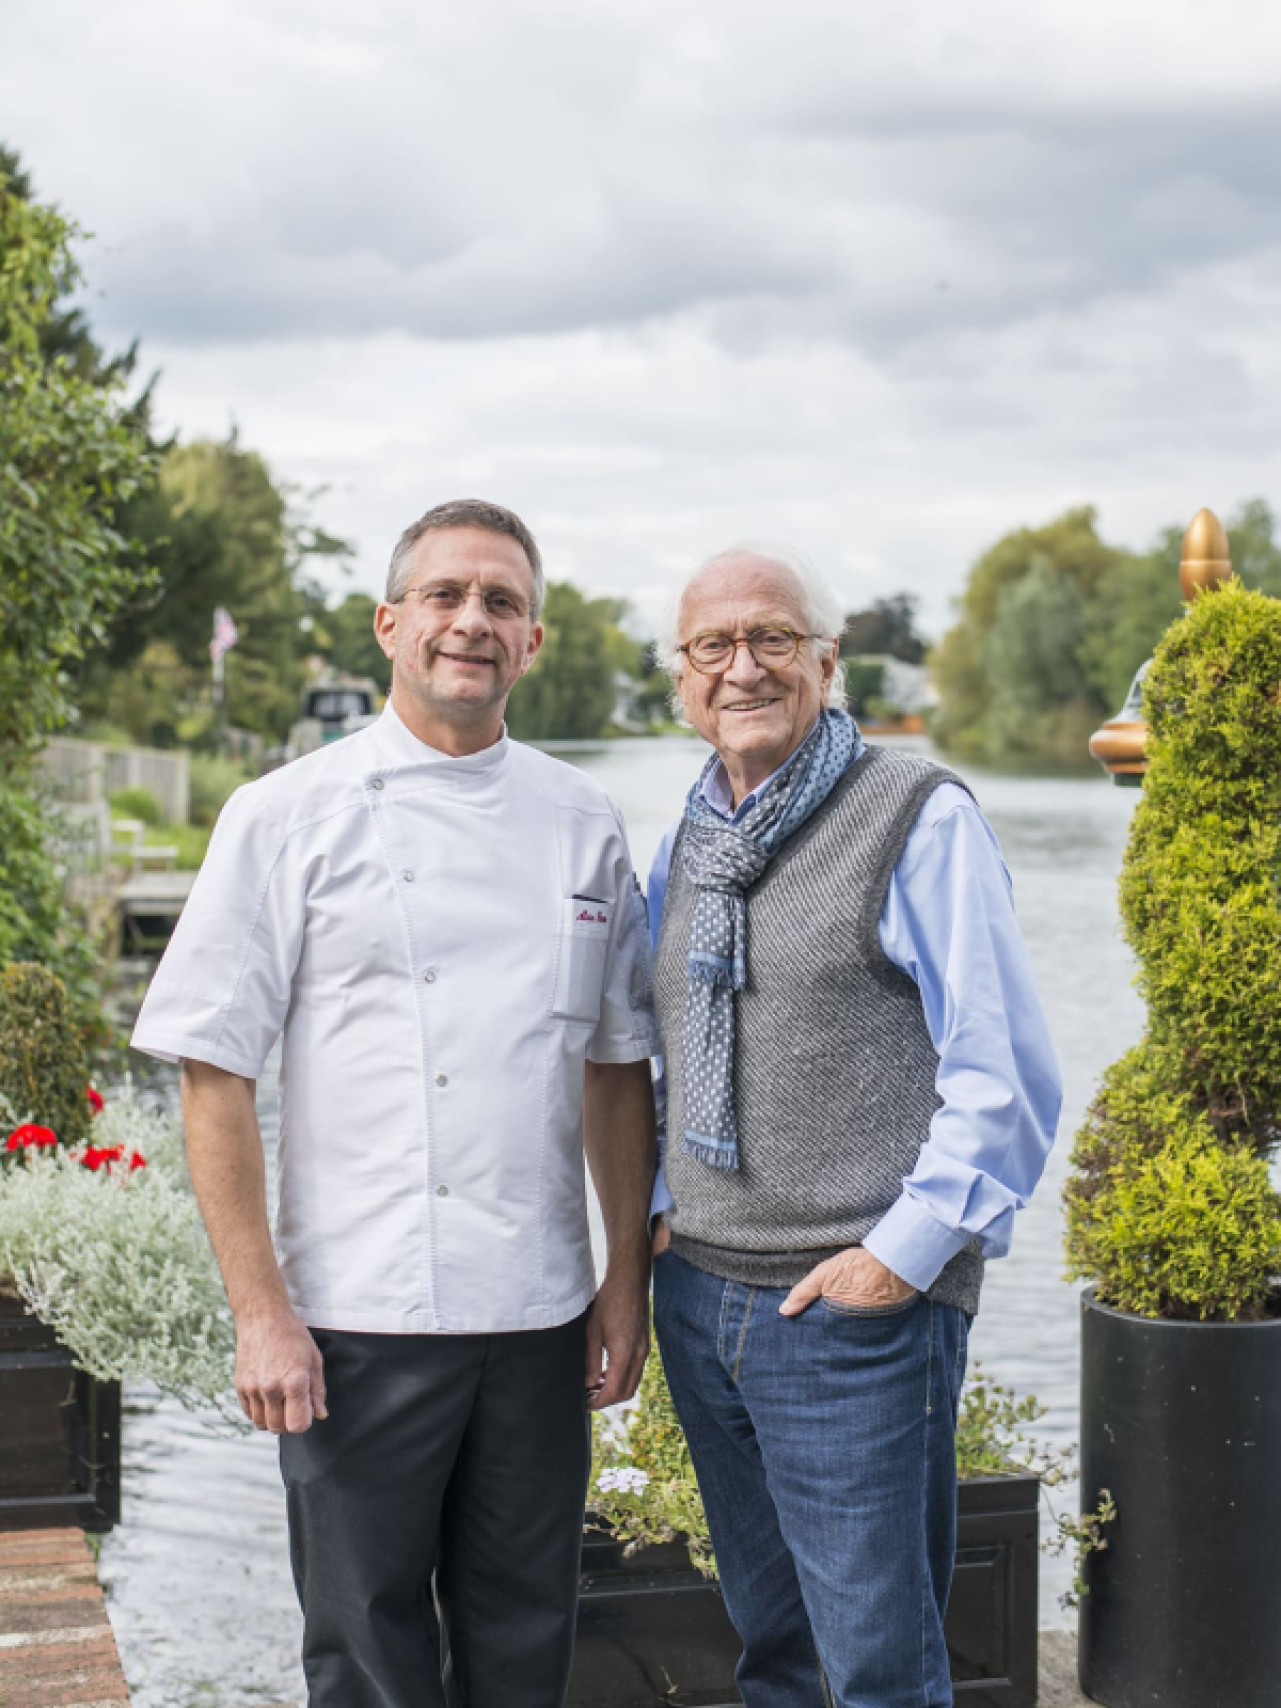 Michel Roux Sr, the famous starred Chef, renewed his trust in EuroCave - Photo: Michel Roux and his son, Alain Roux